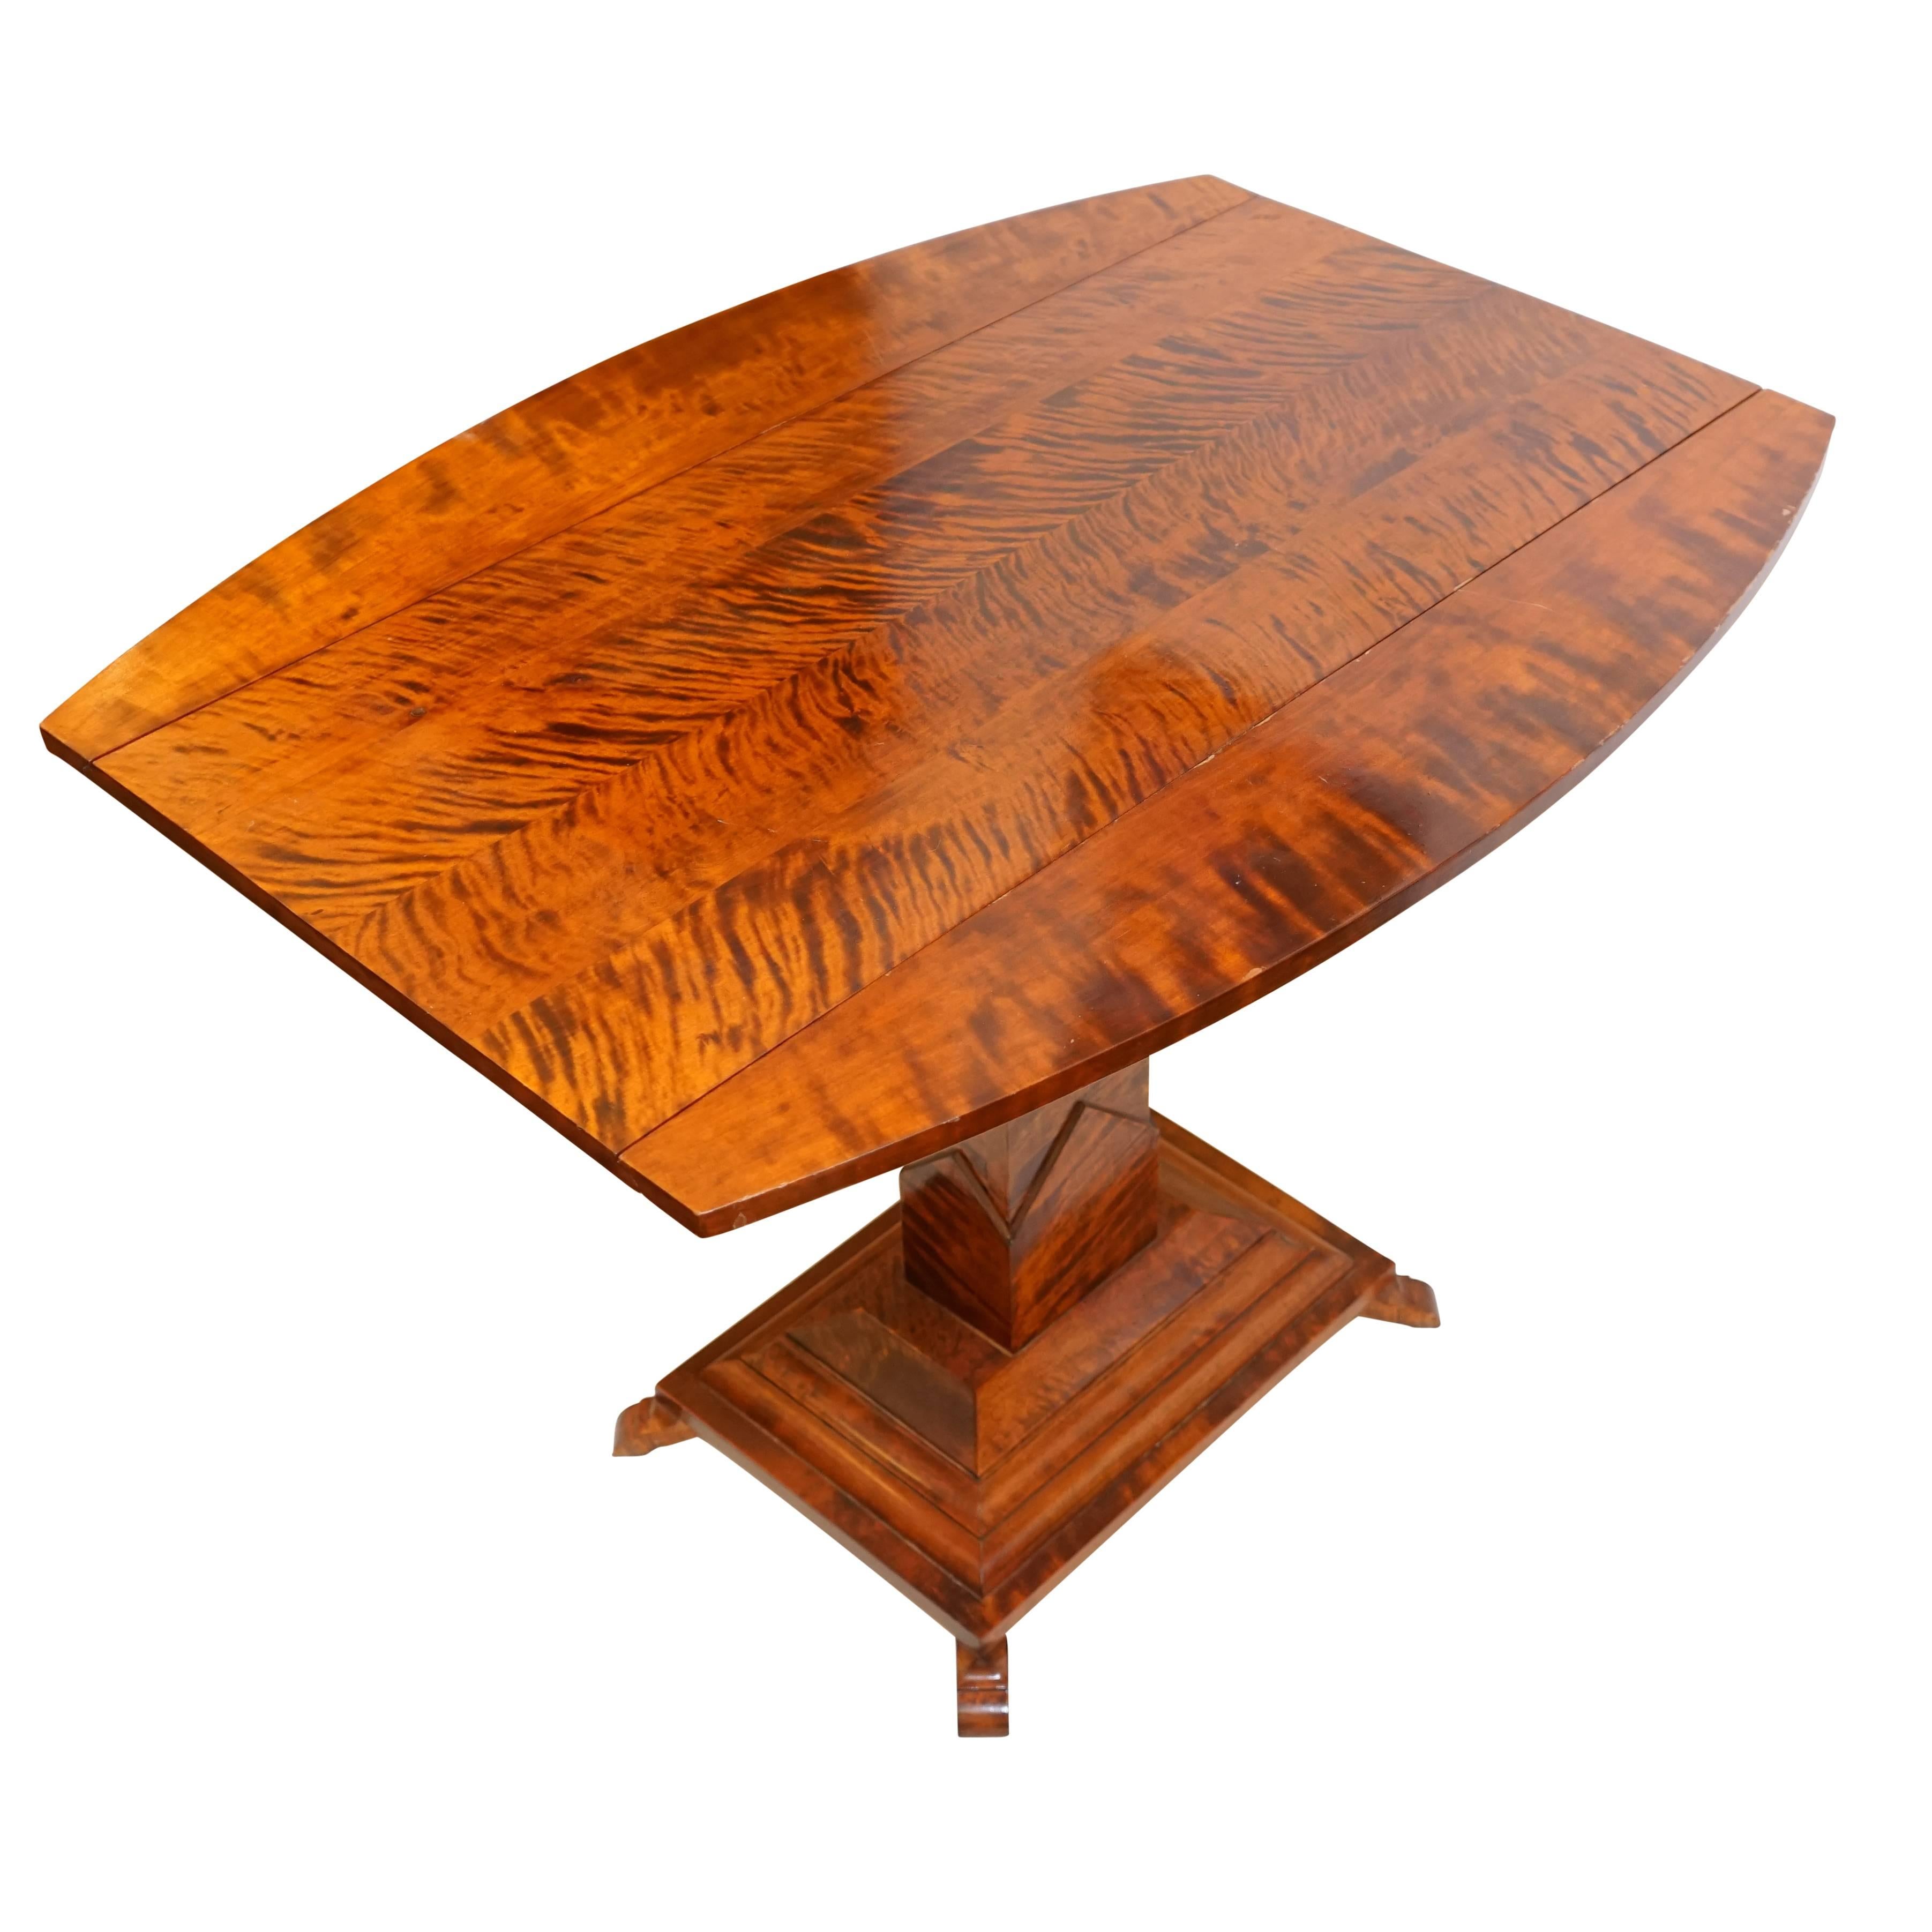 A slim console which opens to seat four, this solid birch table retains its original warm, walnut stain. A handsome addition to a dining alcove, the table features unique geometric features on its pedestal base and measures 29.5